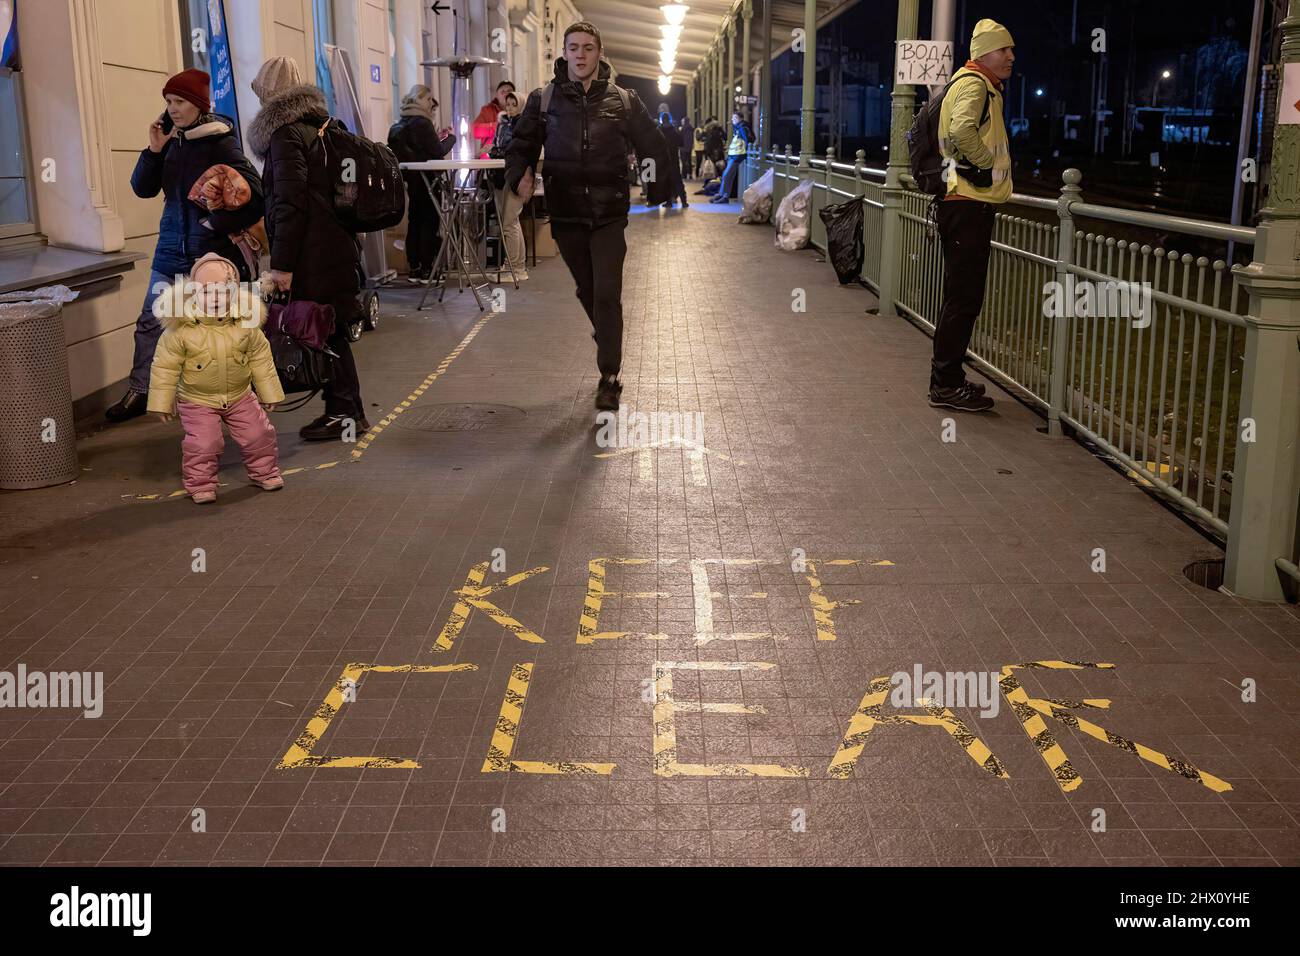 Przemysl, Poland. 08th Mar, 2022. A view of the 'Keep Clear' sign on the floor at Przemysl train station. More than 1.5 millions Ukrainians have fled from their country to Poland due to the Russian invasion, according to the latest figures from United Nations High Commissioner for Refugees (UNHCR). Credit: SOPA Images Limited/Alamy Live News Stock Photo